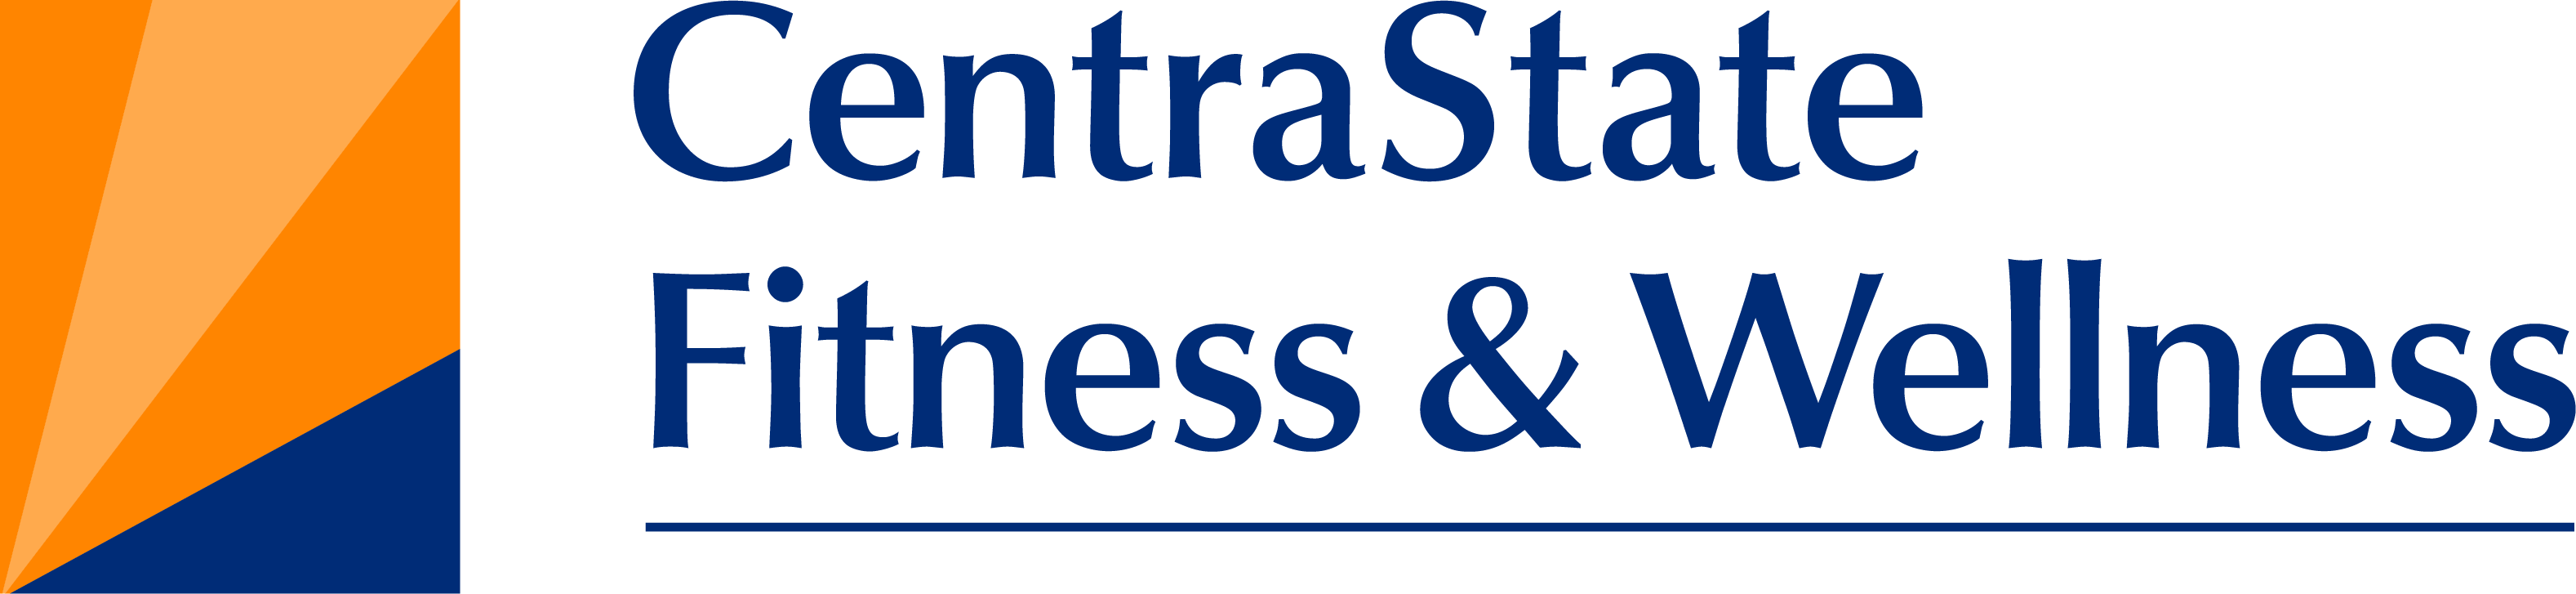 CentraState Fitness and Wellness